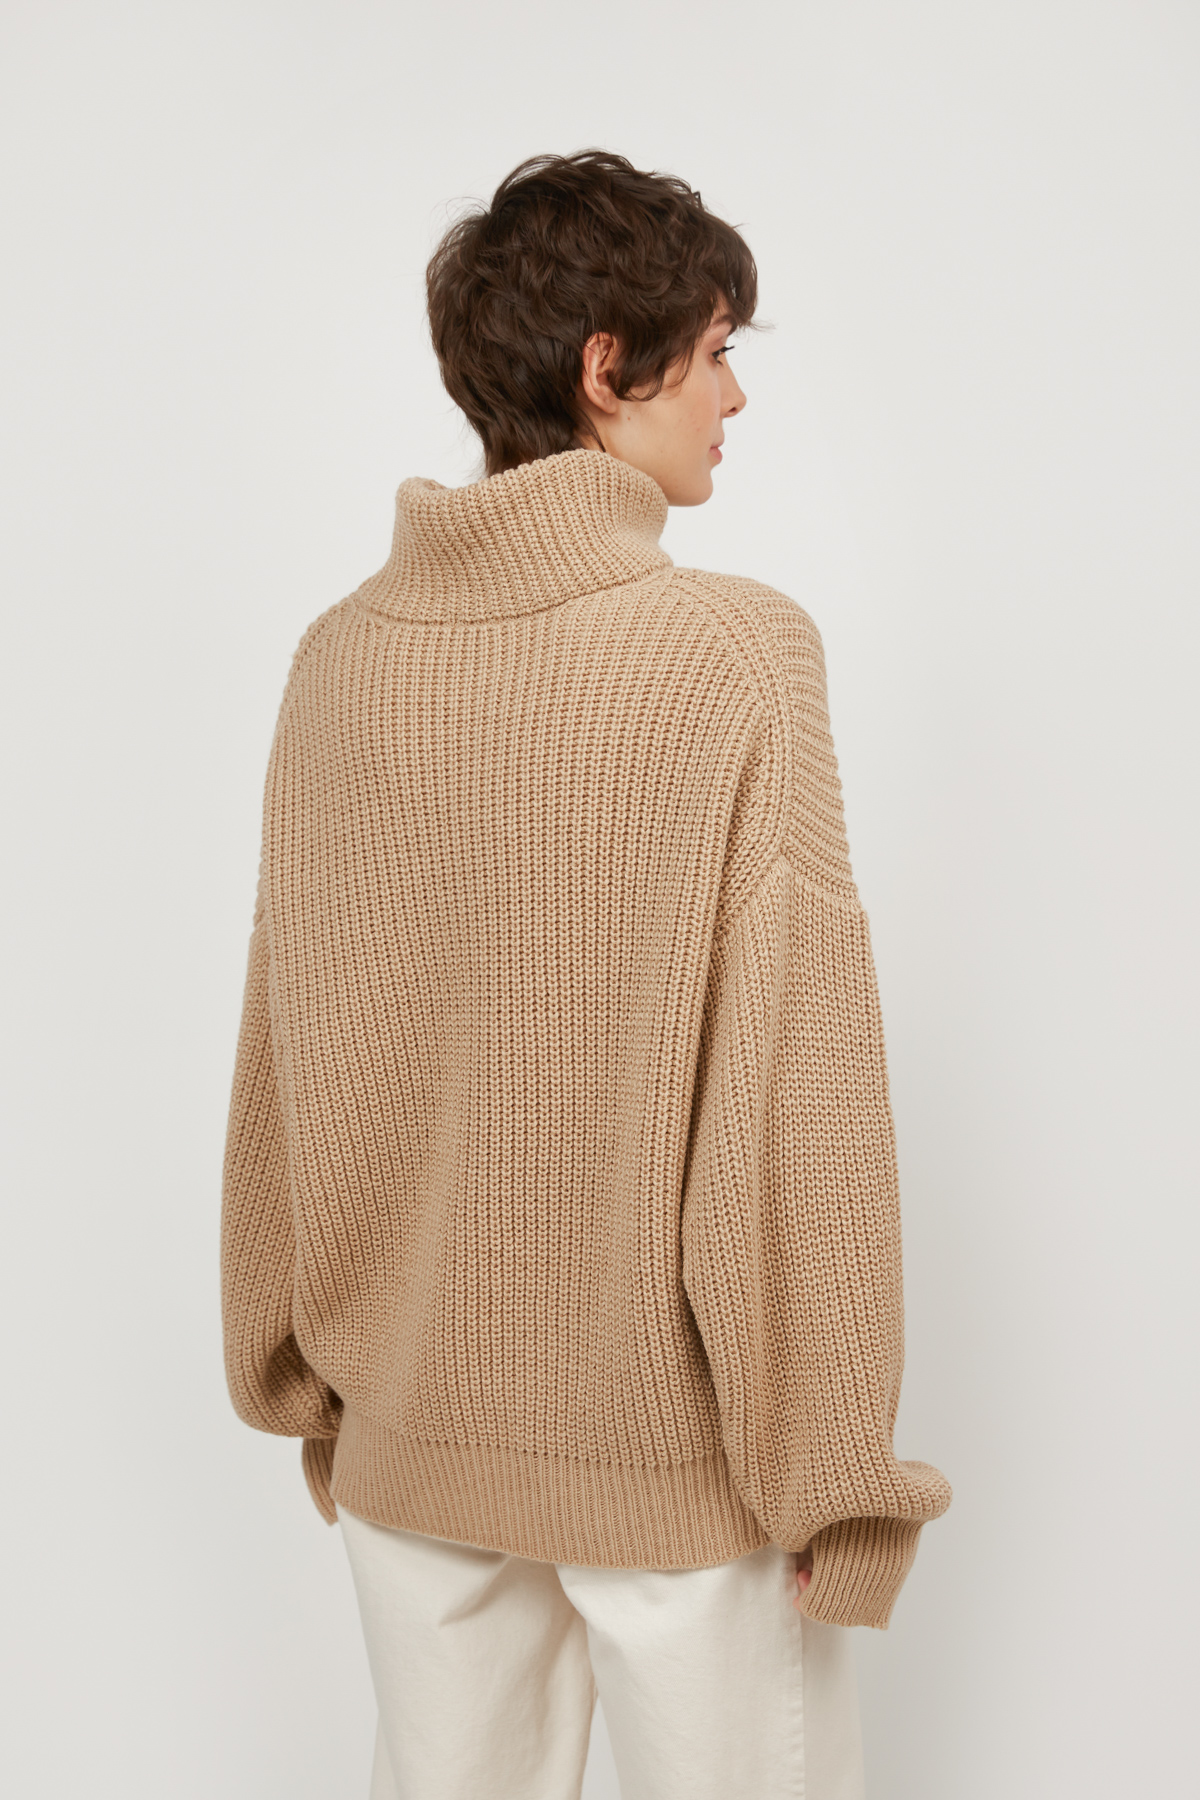 Knitted beige sweater with wool, photo 5